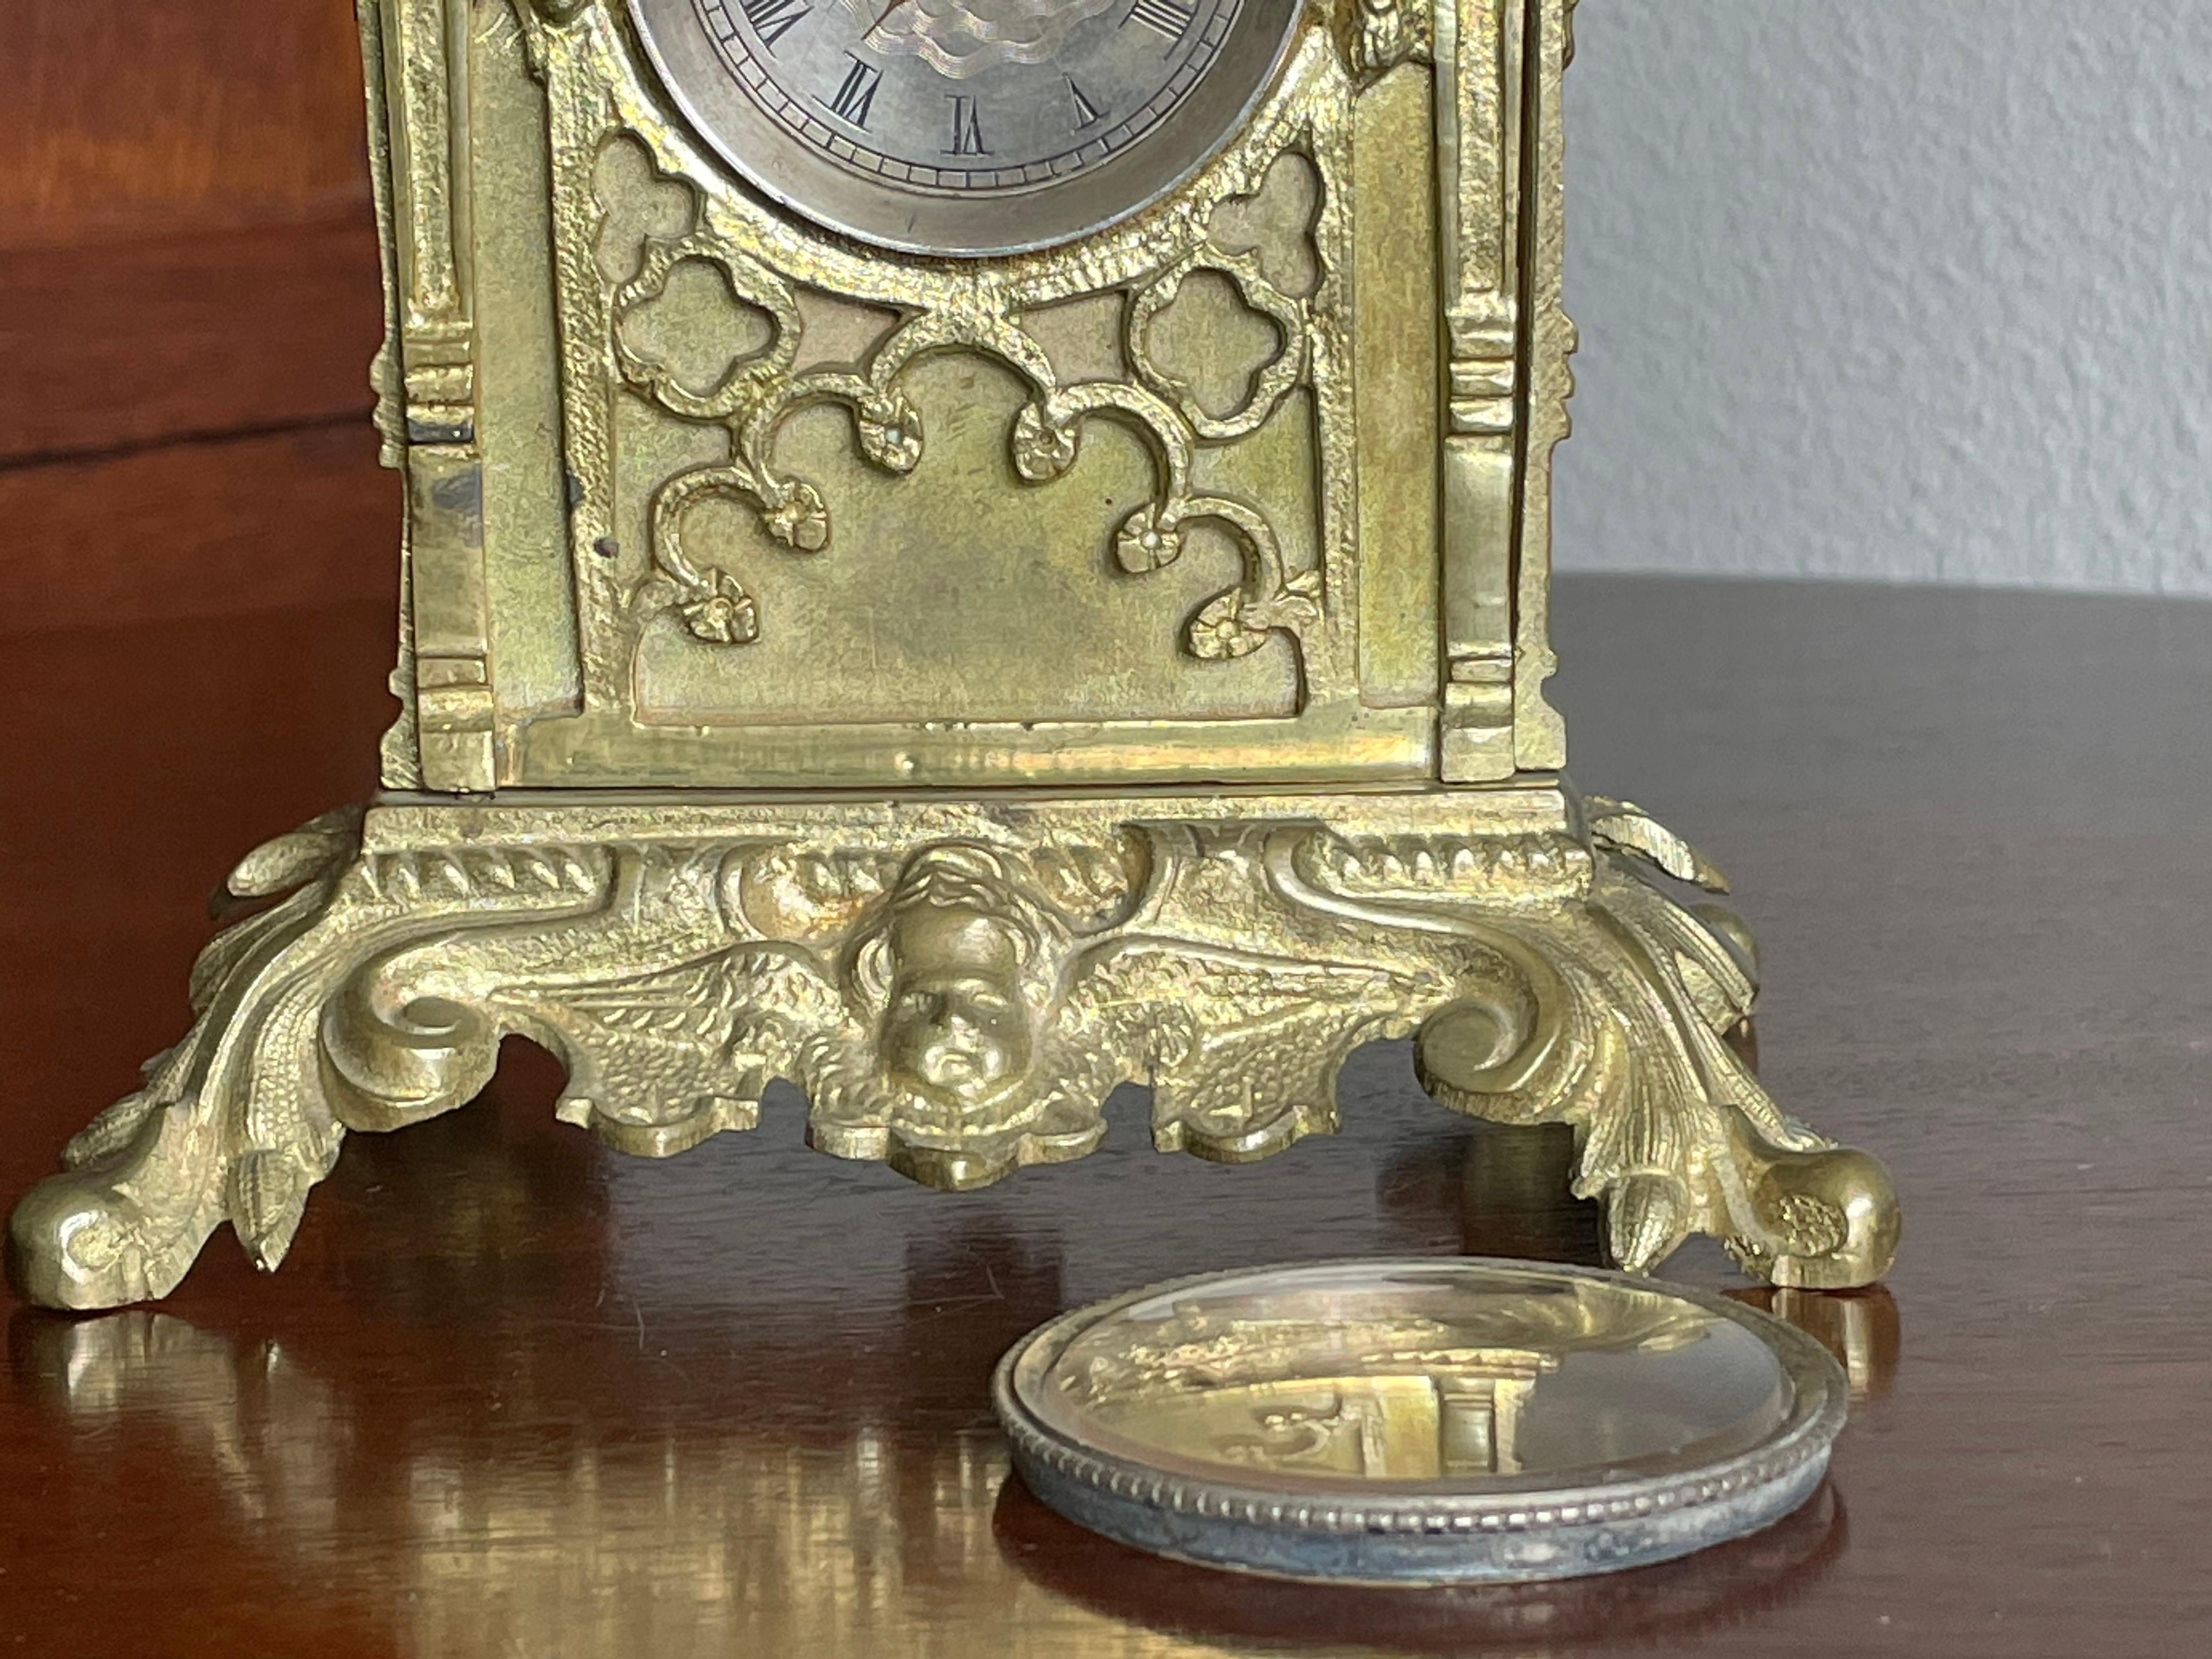 Gothic Table Clock w. Stunning Antique Pocket Watch Made of Gilt Bronze or Gold For Sale 3